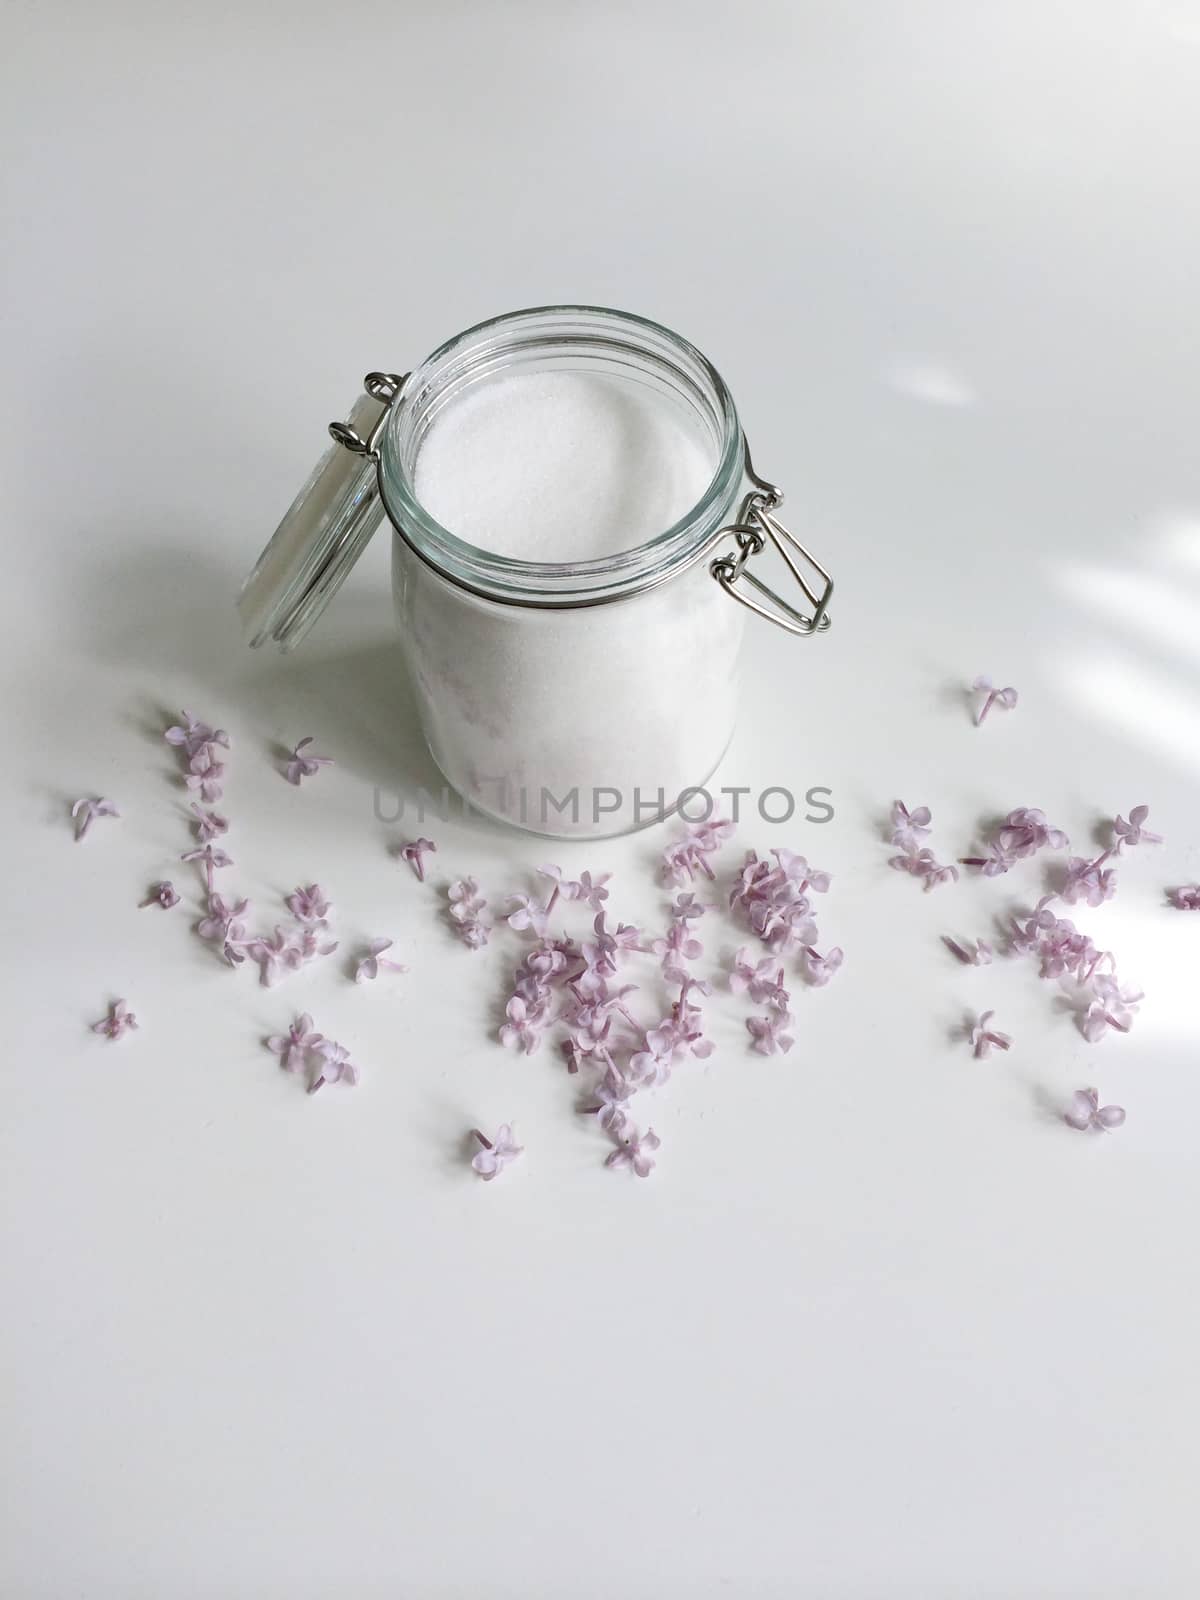 Glass jar of granulated white sugar and lilac flowers